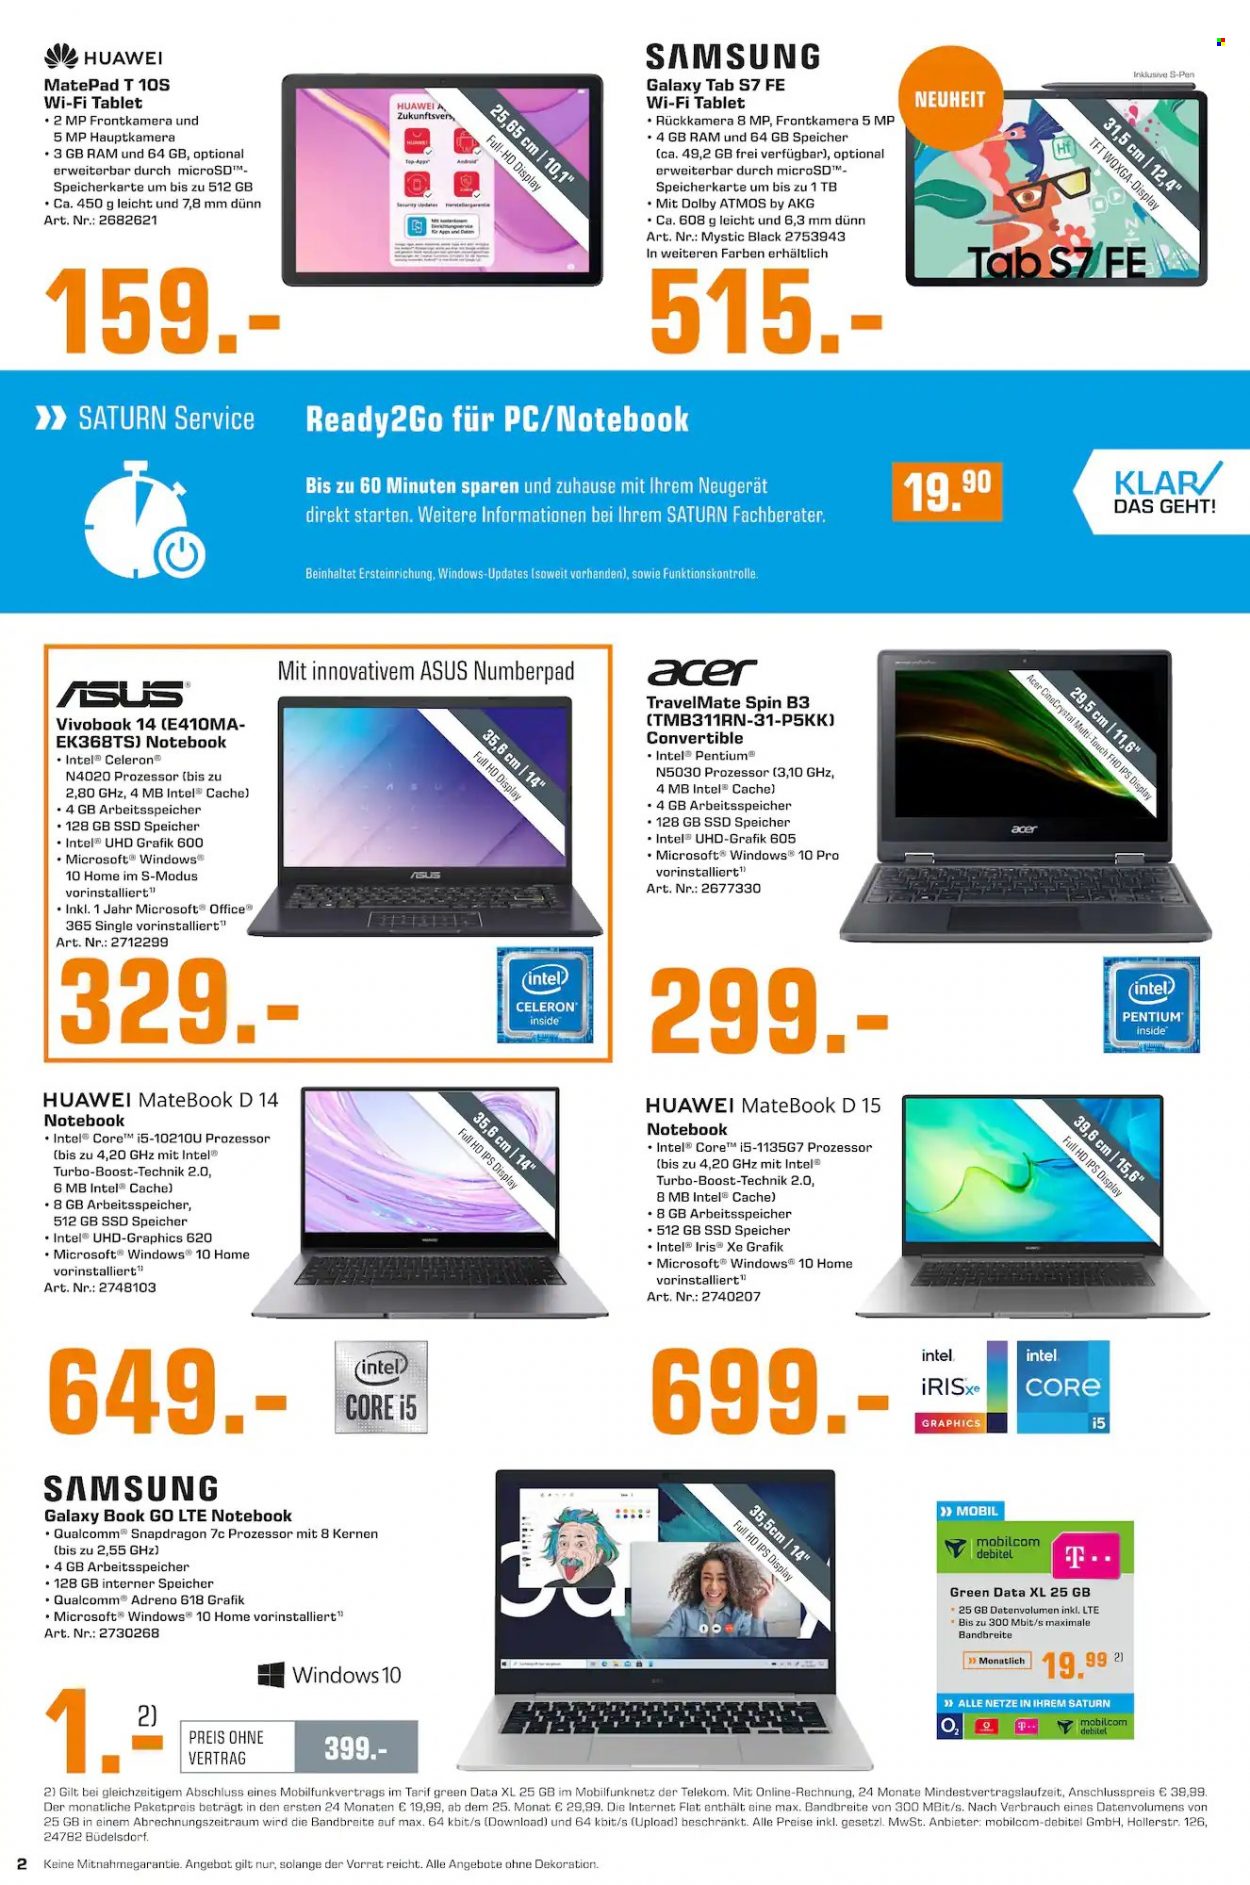 thumbnail - Prospekte Saturn - 4.10.2021 - 10.10.2021 - Produkte in Aktion - Samsung, Huawei, Asus, Huawei Mate, Acer, MateBook, Huawei MateBook, Tablet, Office, SSD-Speicher. Seite 2.